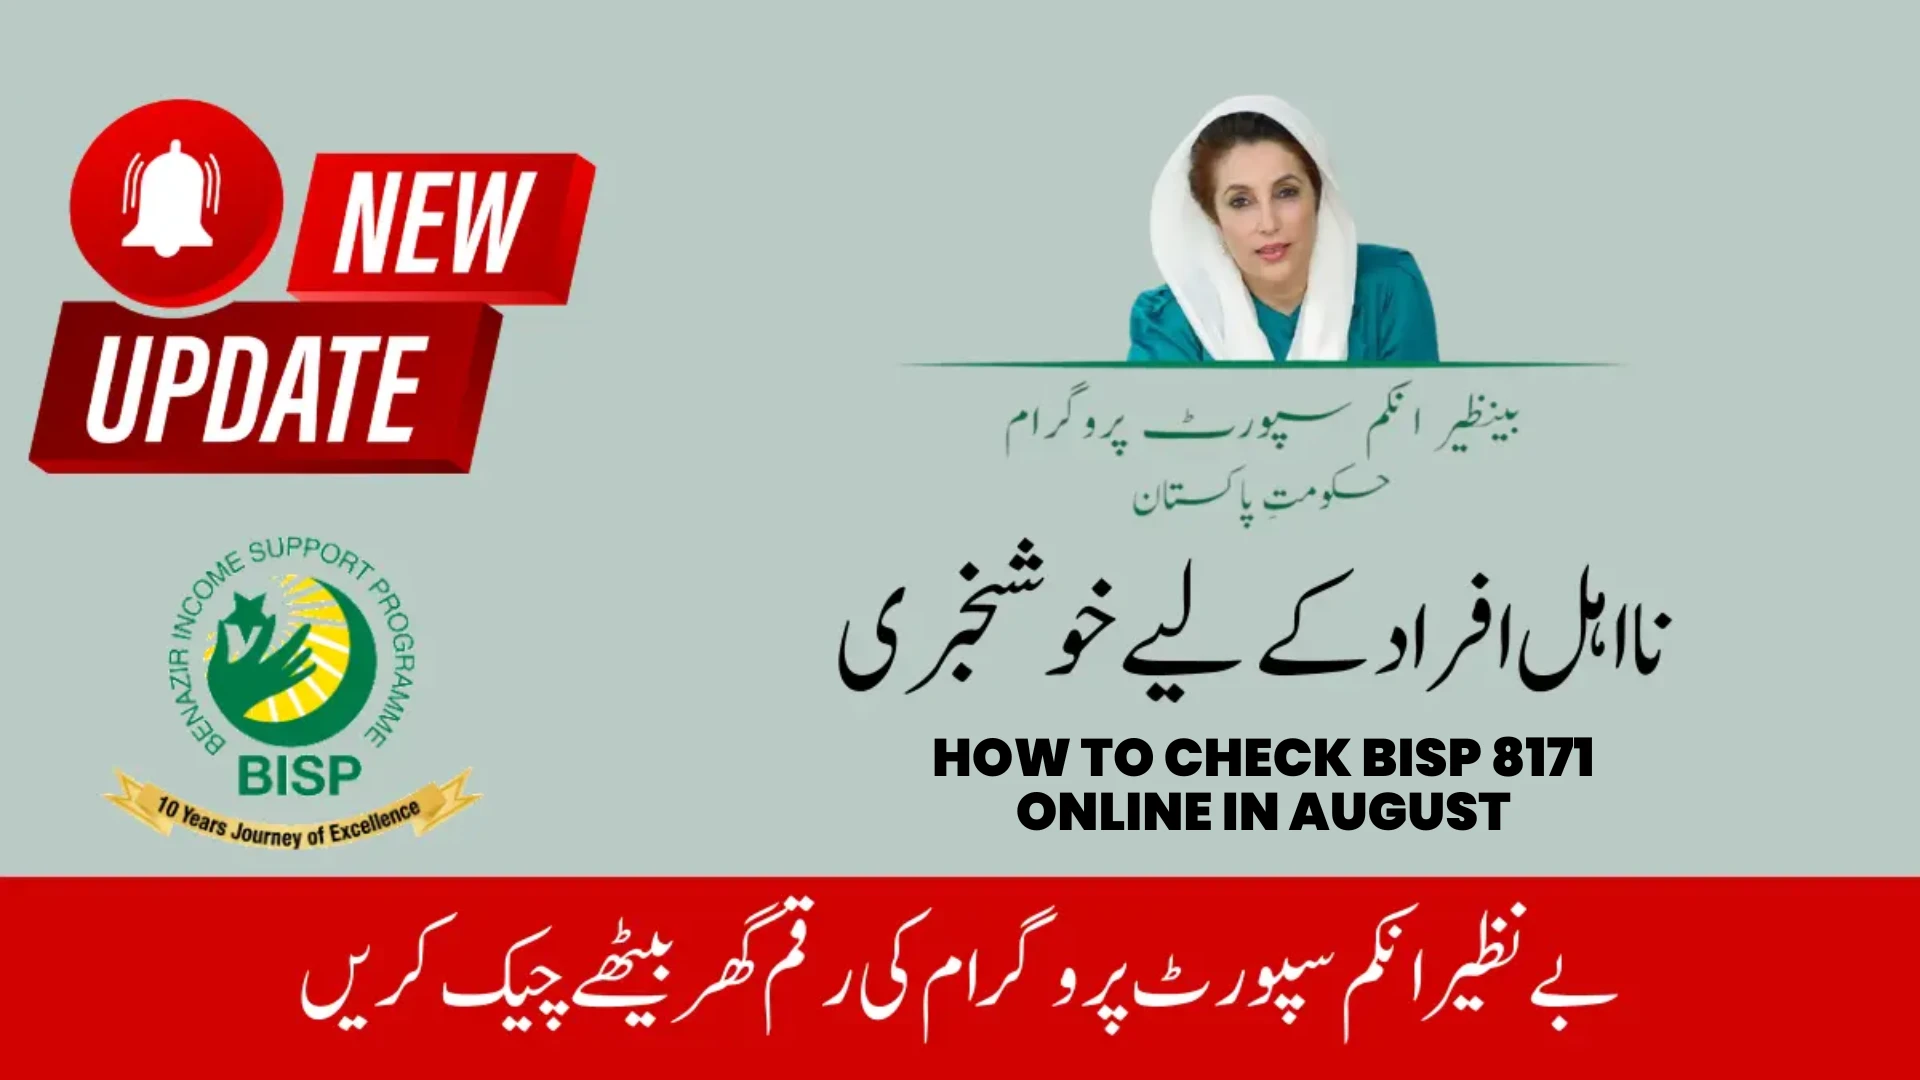 How to Check BISP 8171 Online in August